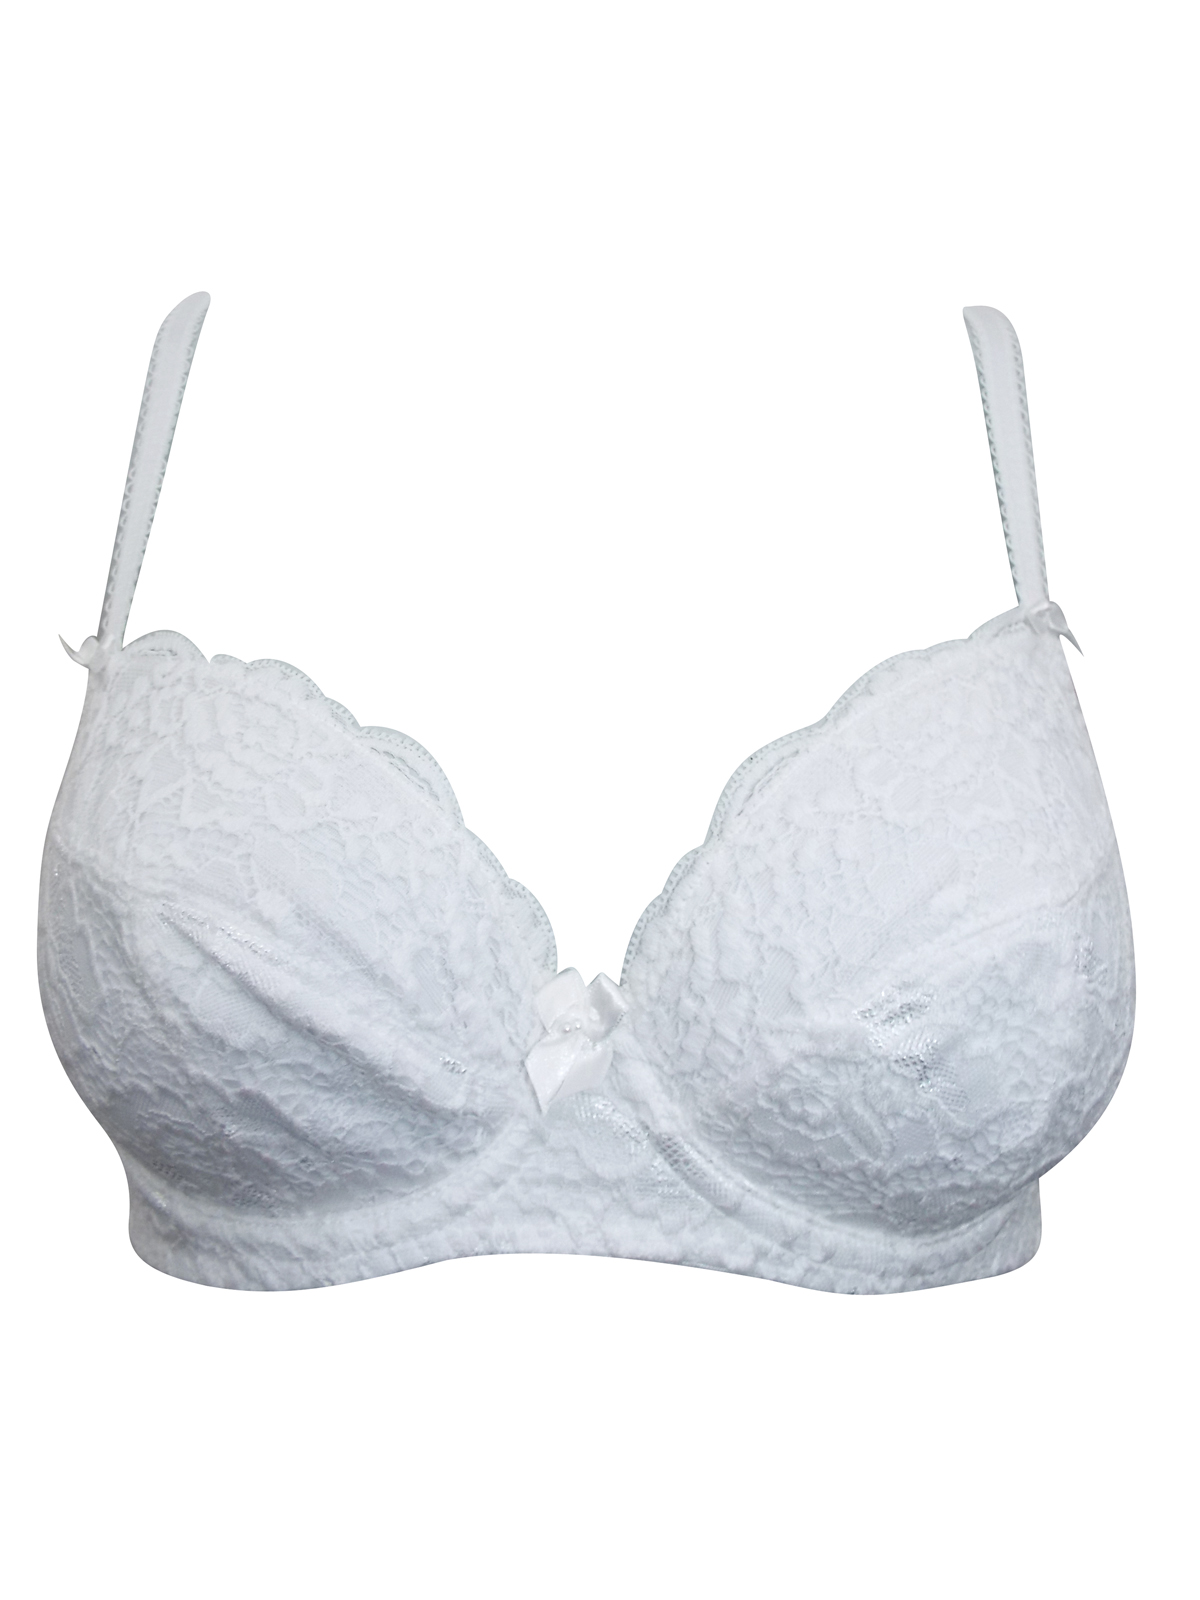 F&F - - WHITE All Over Lace Underwired Full Cup Bra - Size 32 to 38 (B-C-D)